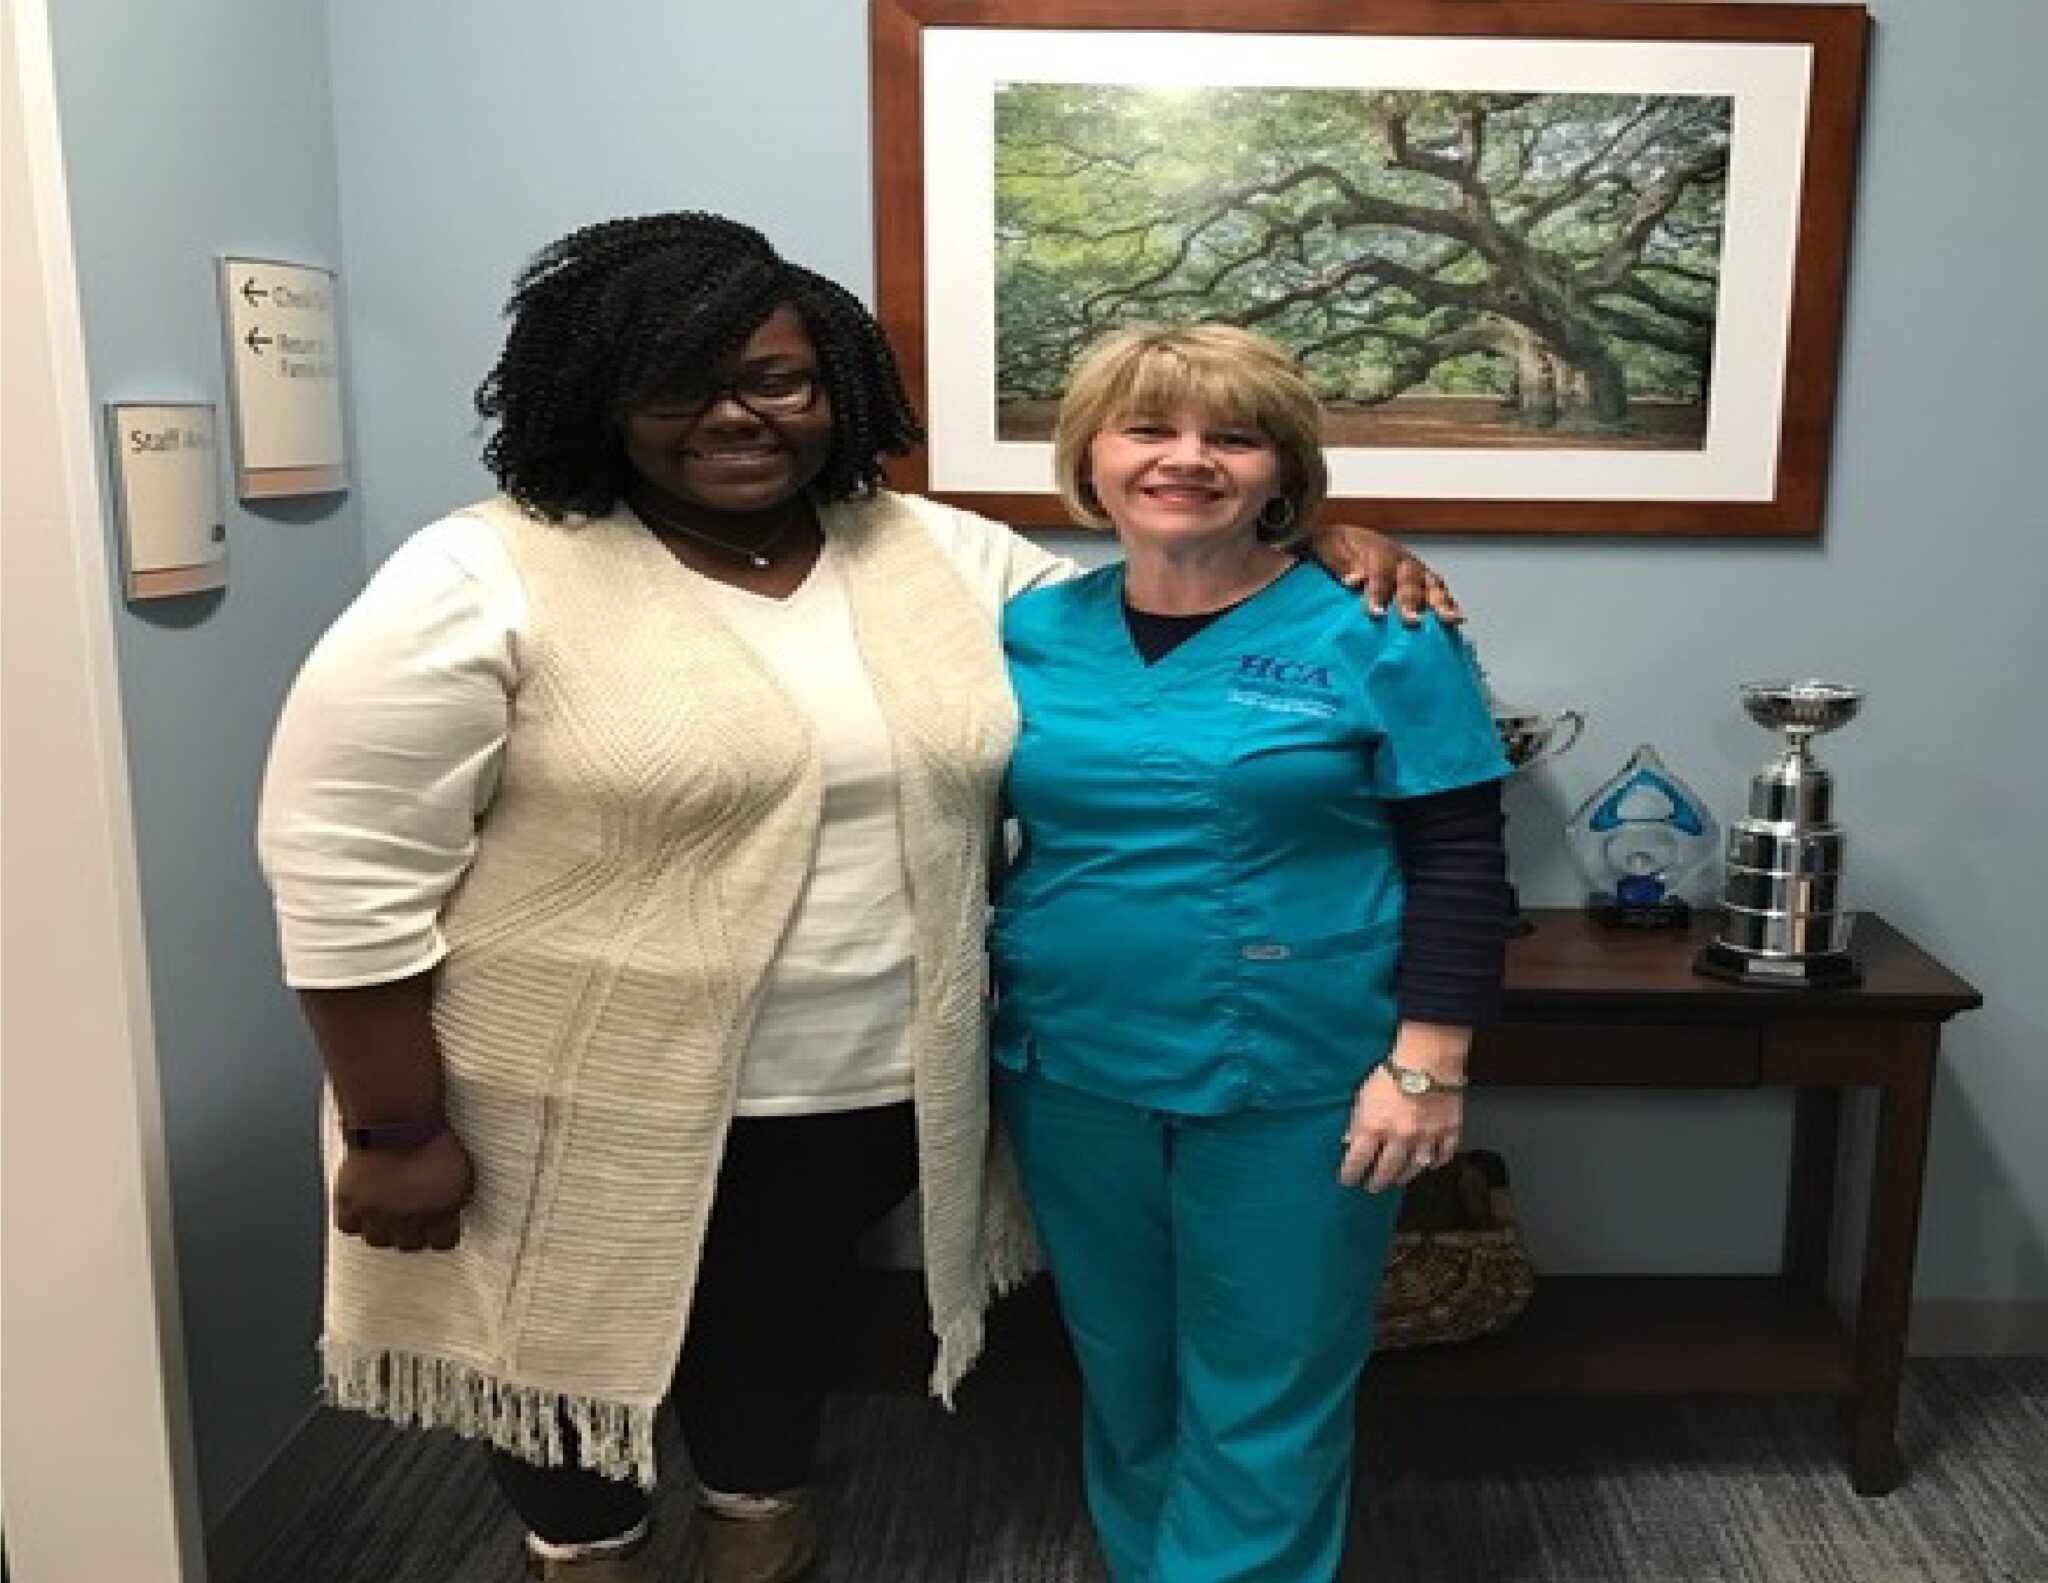 Pictured: Ms. Ellis (on left) at her first visit to Coastal Carolina Bariatric and Surgical Center three weeks post-operatively. 